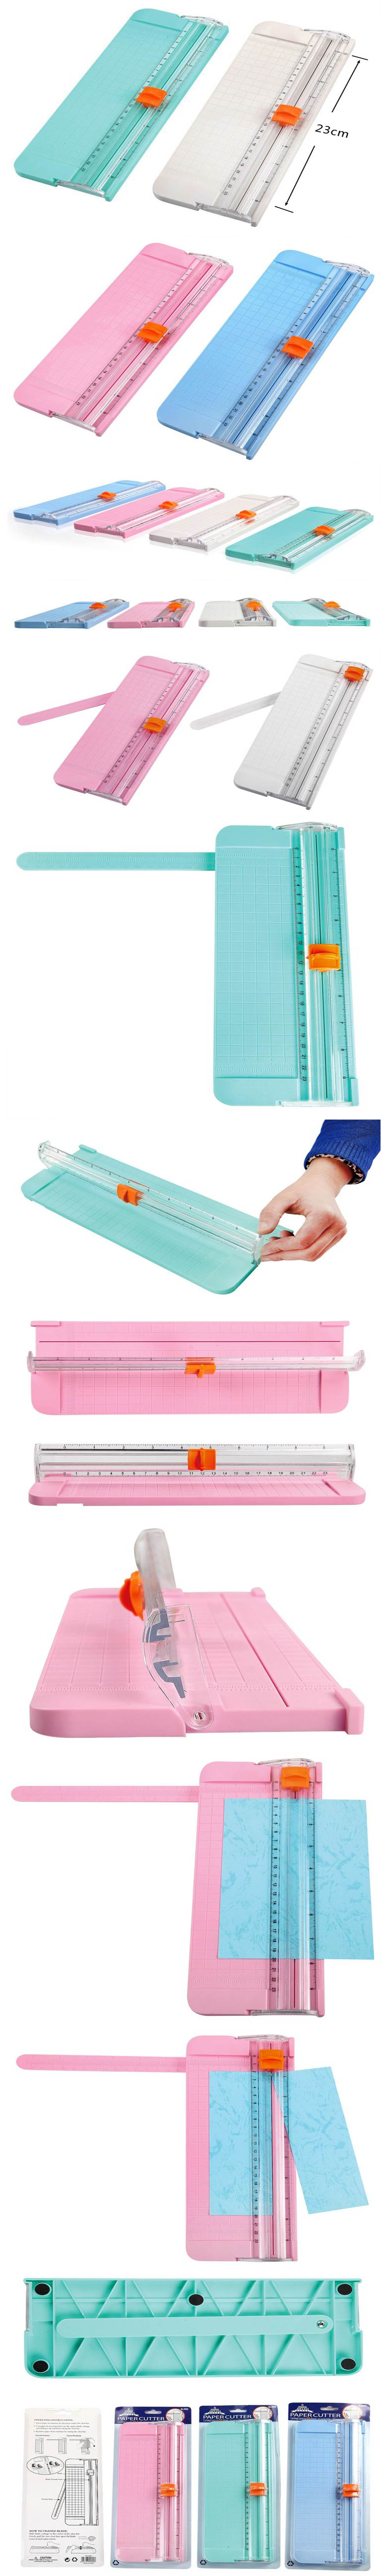 Jie-Li-Si-9090-Paper-Cutter-A5-Film-Cutter-Paper-Tool-Holder-With-Scale-For-School-Office-Supplies-1422433-1